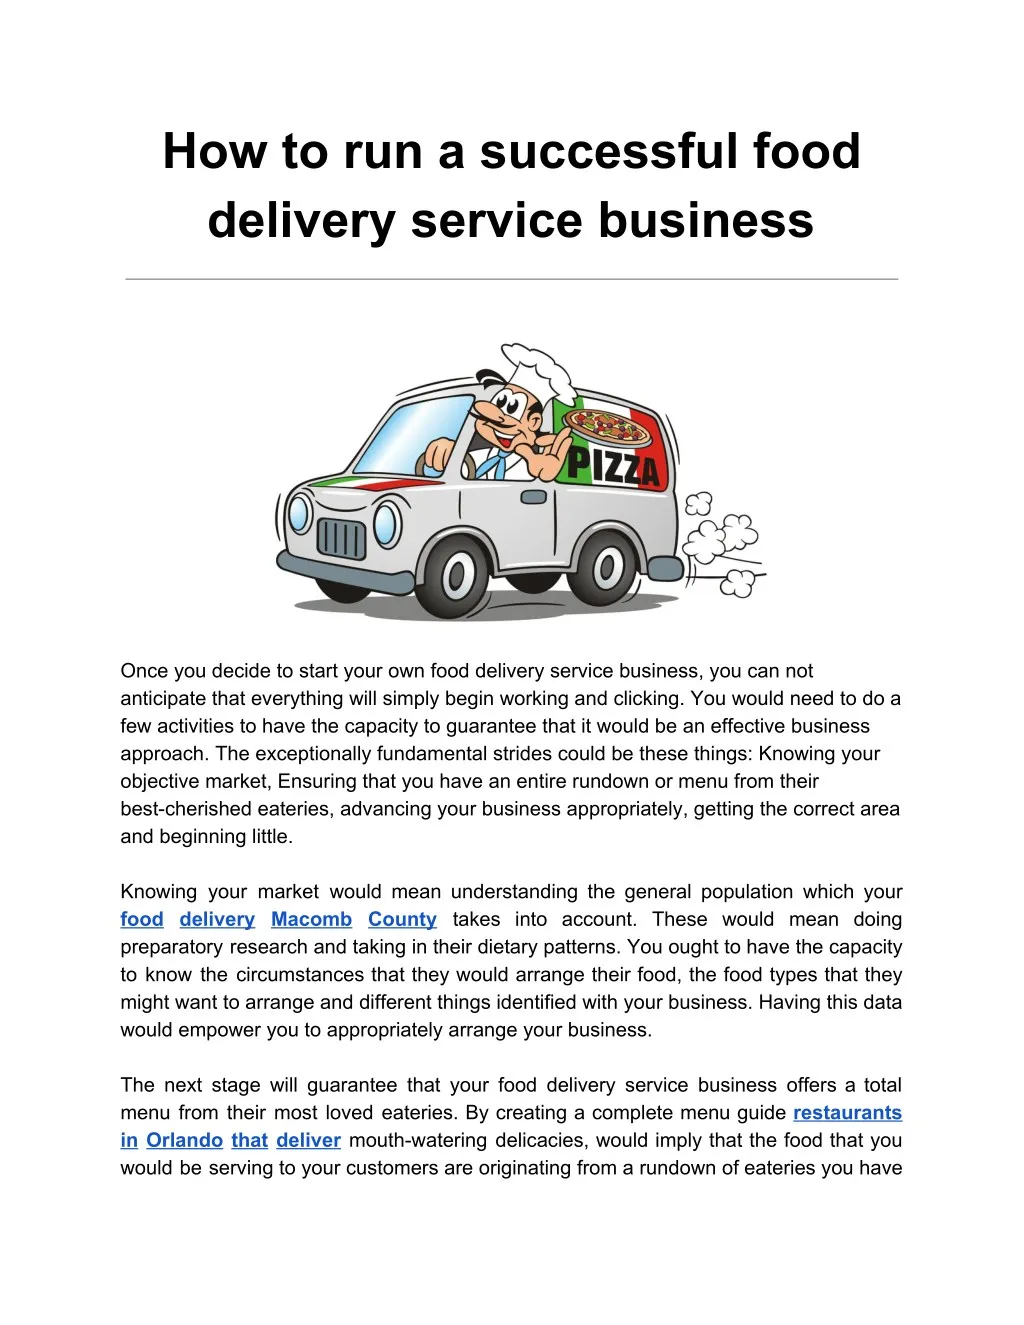 how to run a successful food delivery service